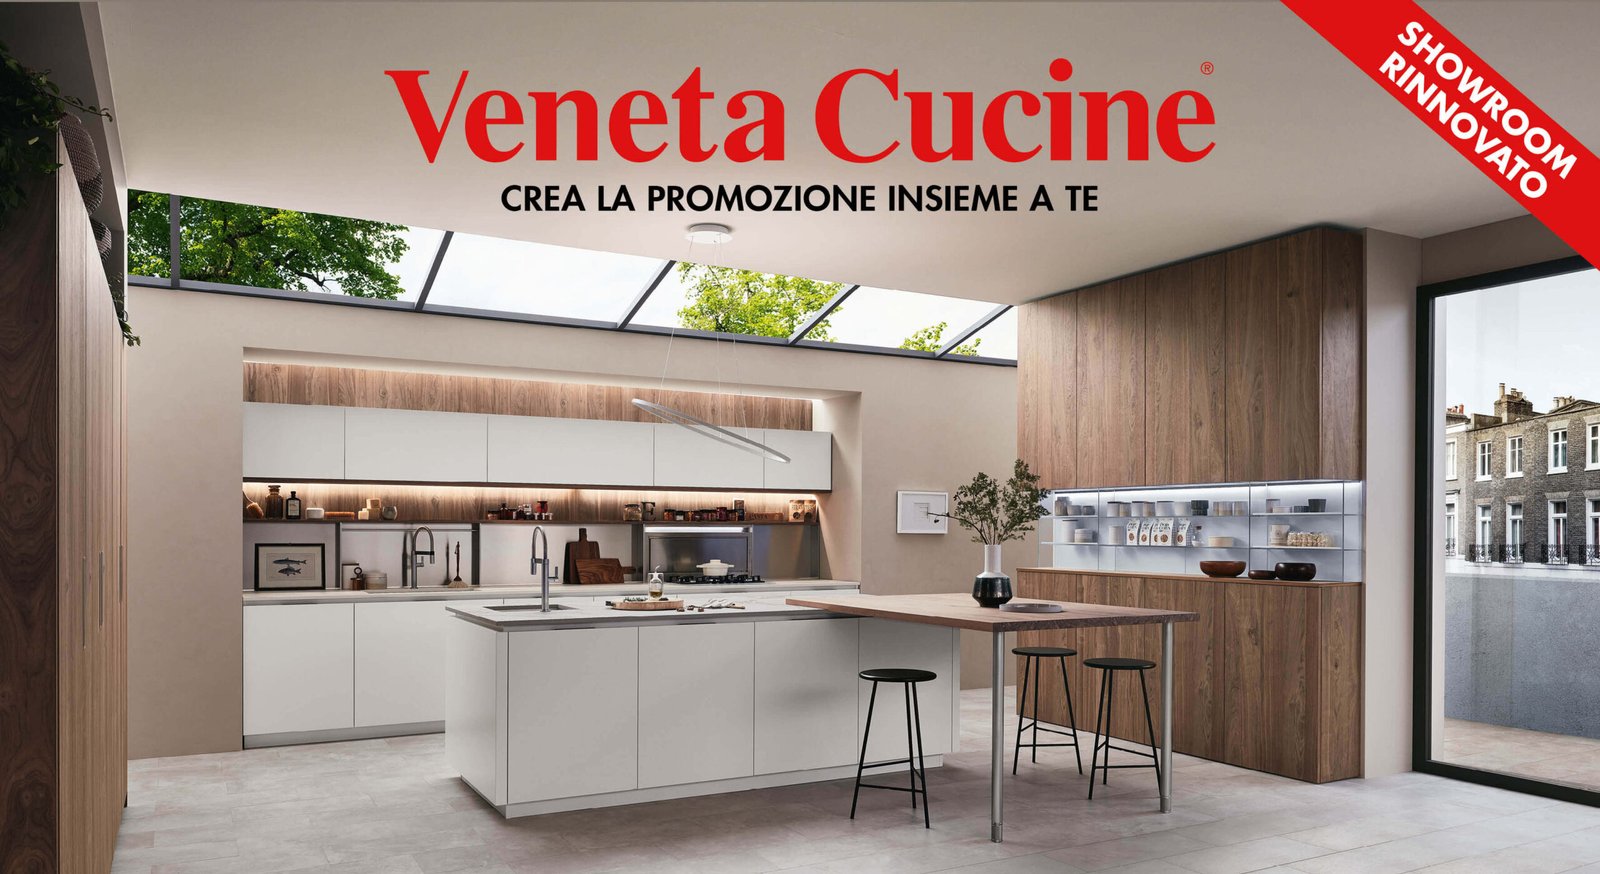 Veneta Cucine | Franchise Cost – How to get, Contact, Apply, Fee